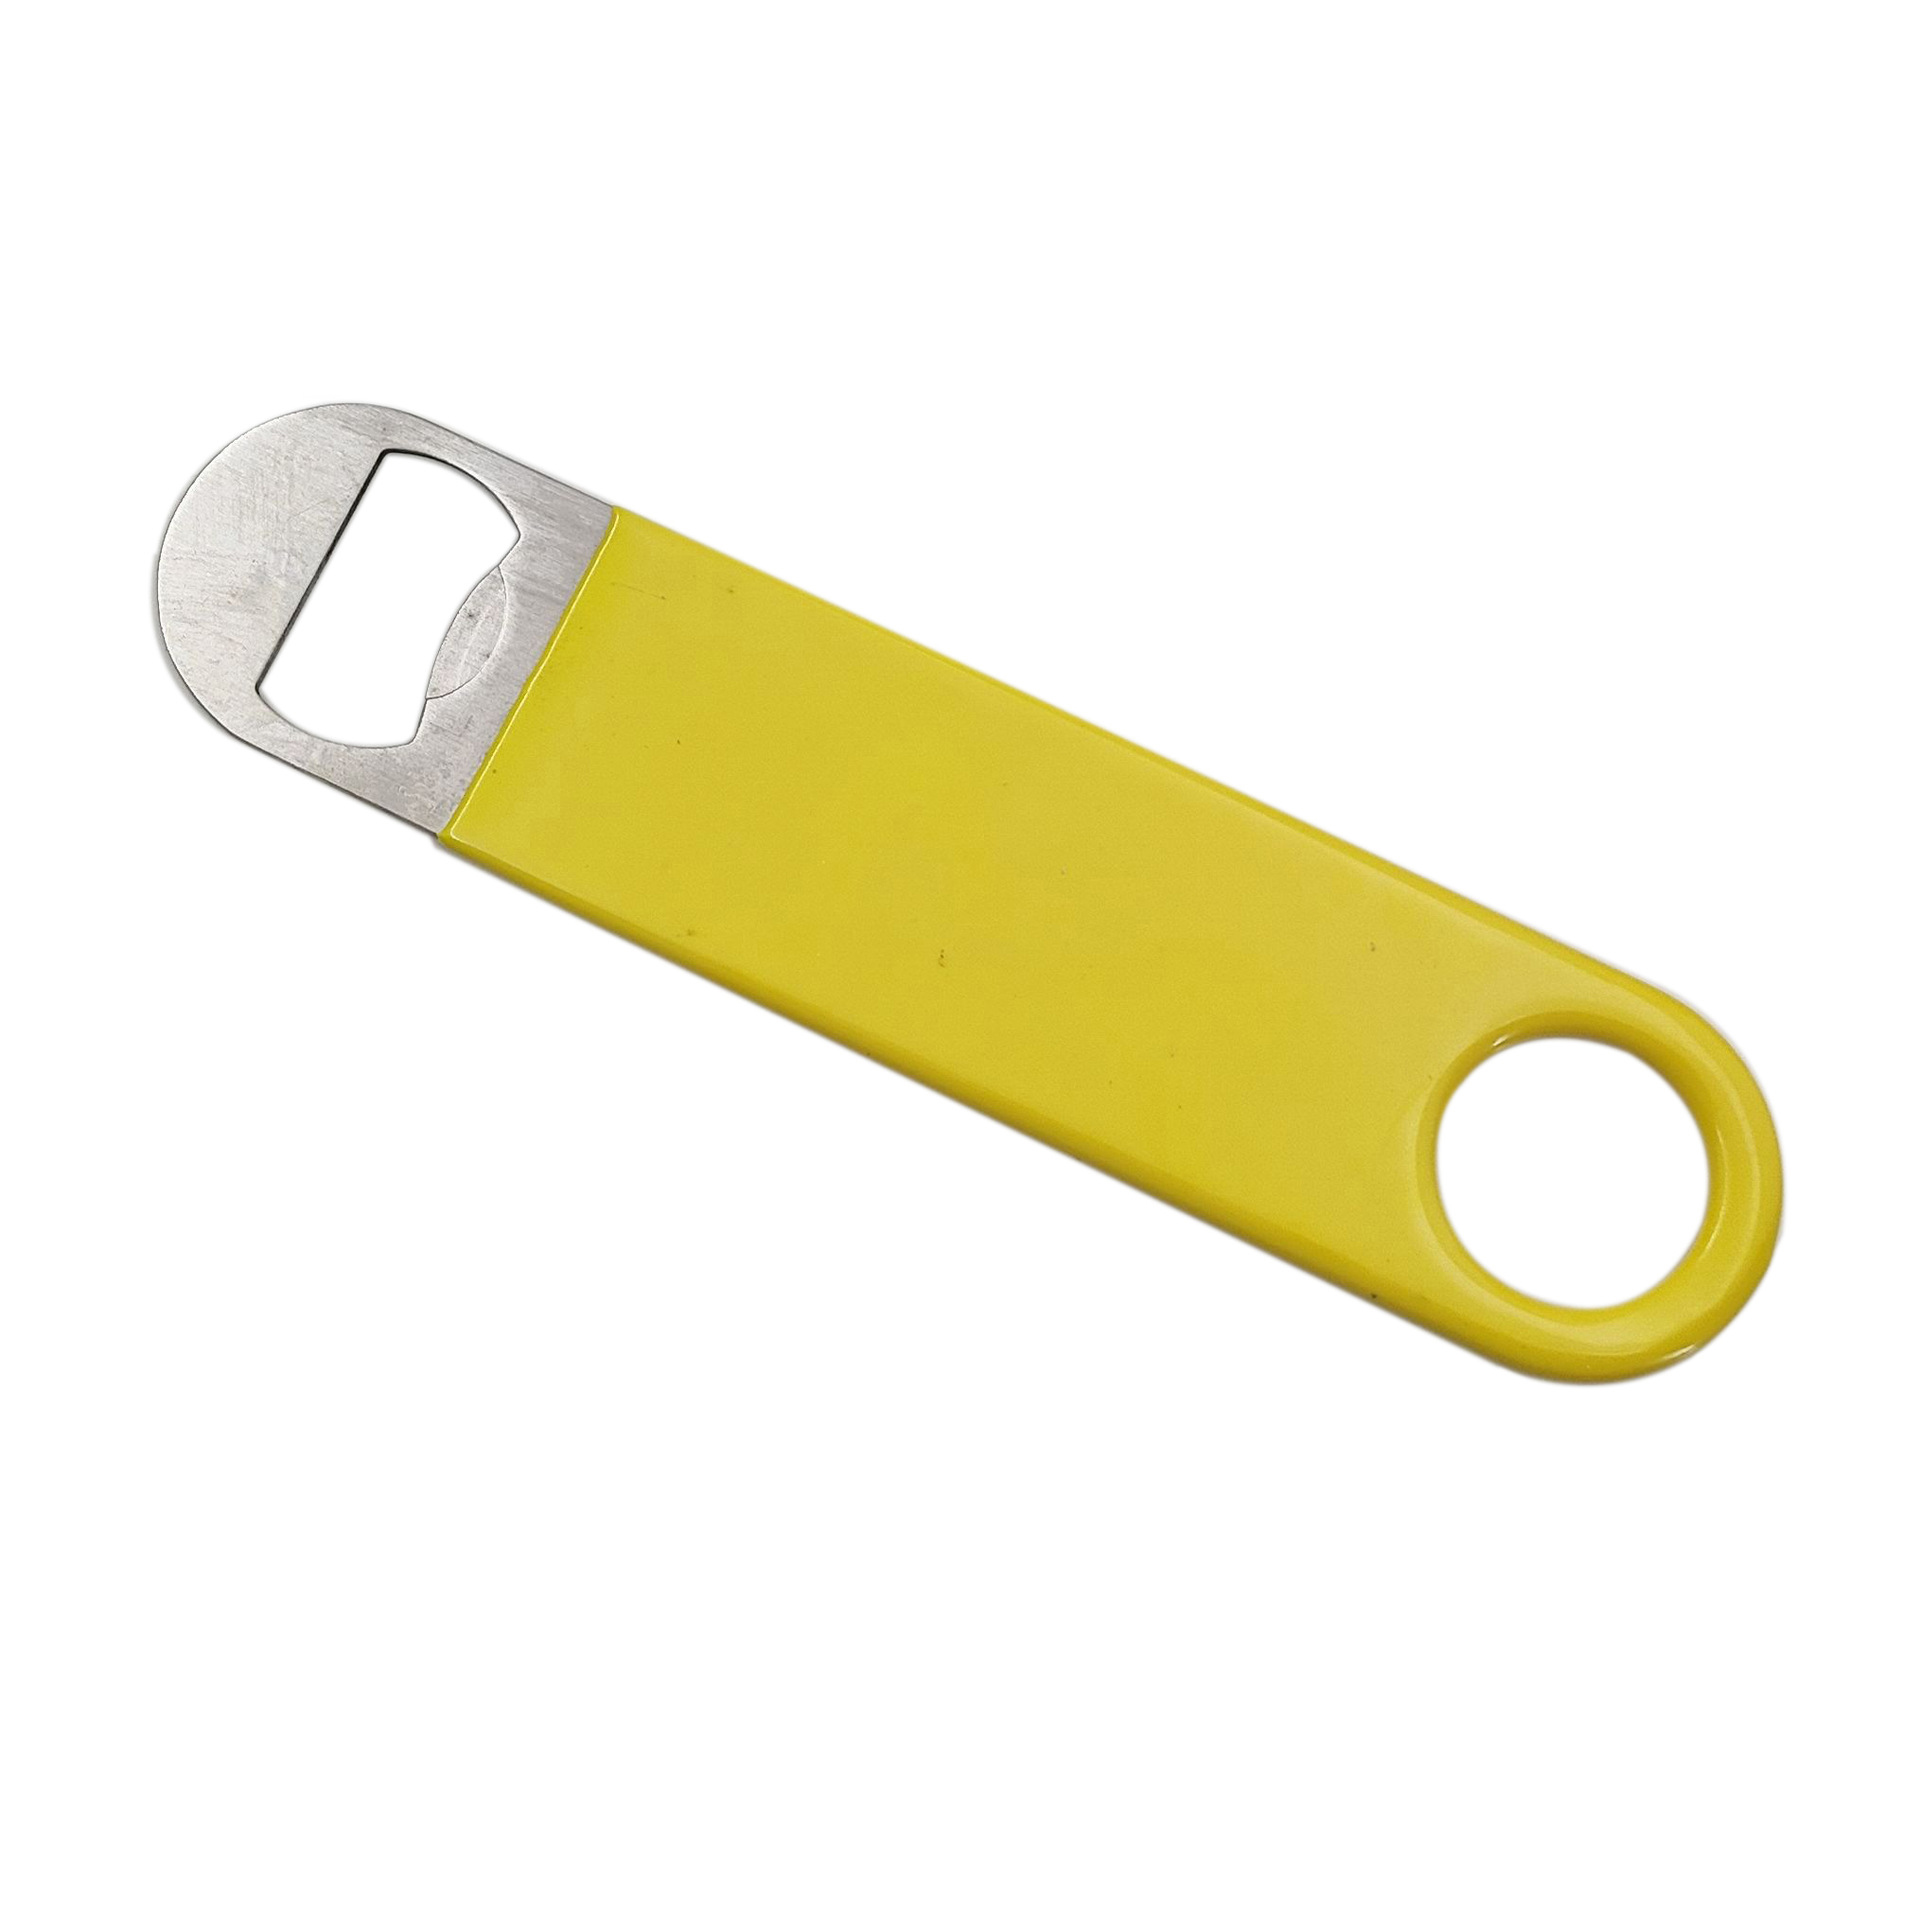 Mini Paddle Style Stainless Steel Bottle Opener